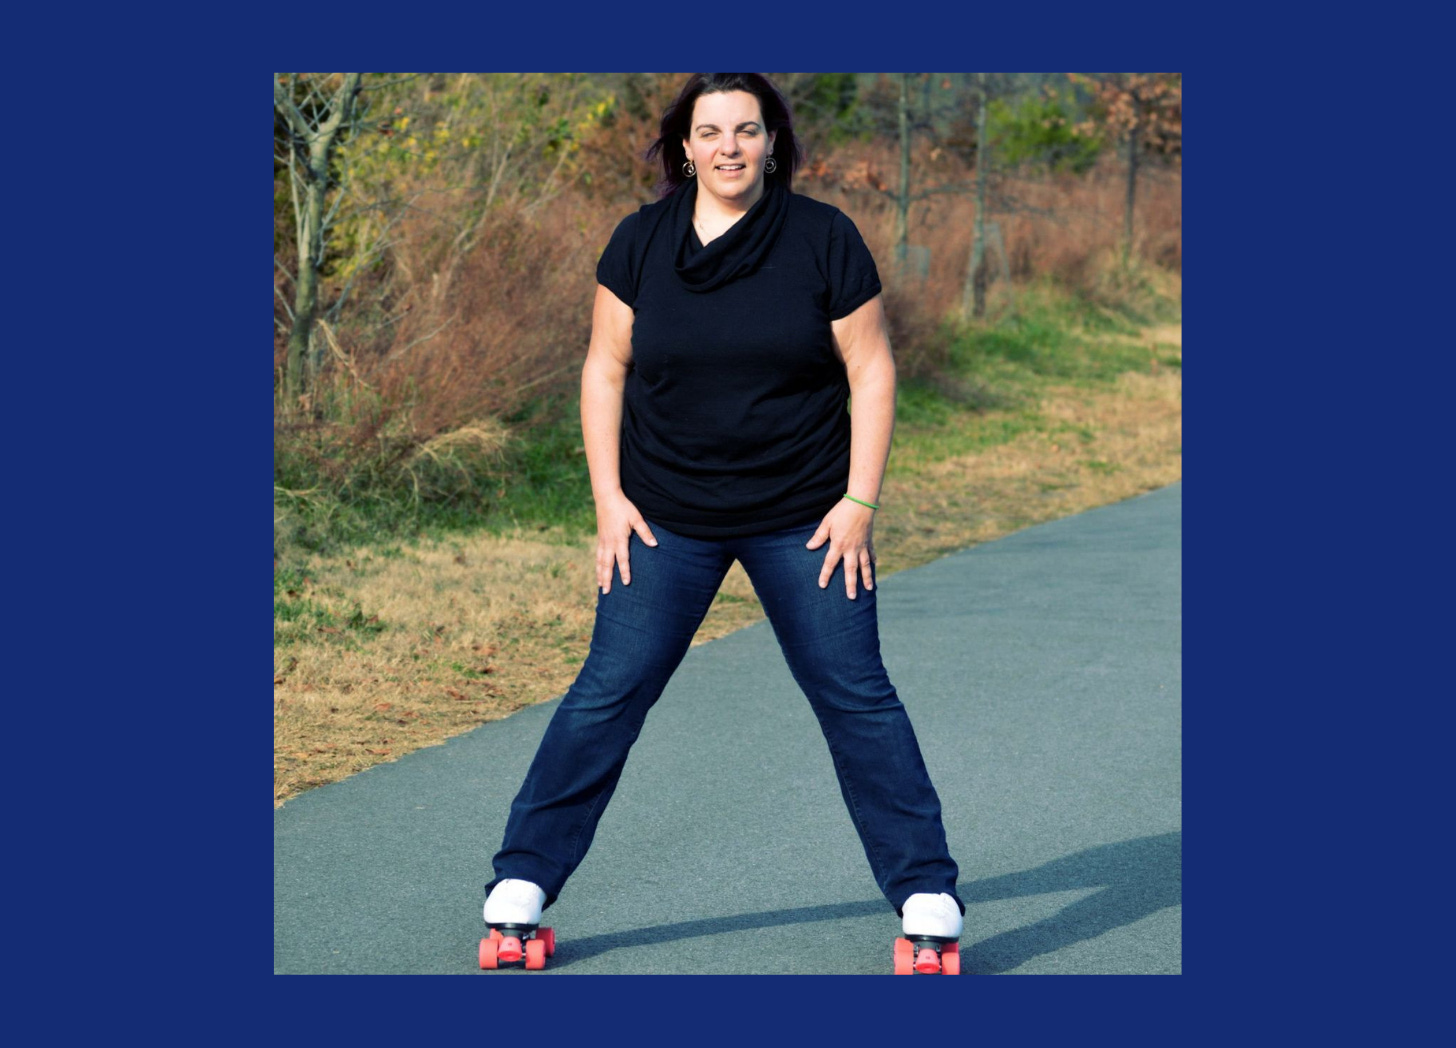 Autistic Woman rollerskating. Unmasking Autism Blog: Sorry, Not Sorry. Autistic Blog | Straddling paradoxes: from inside Angela's Autistic mind